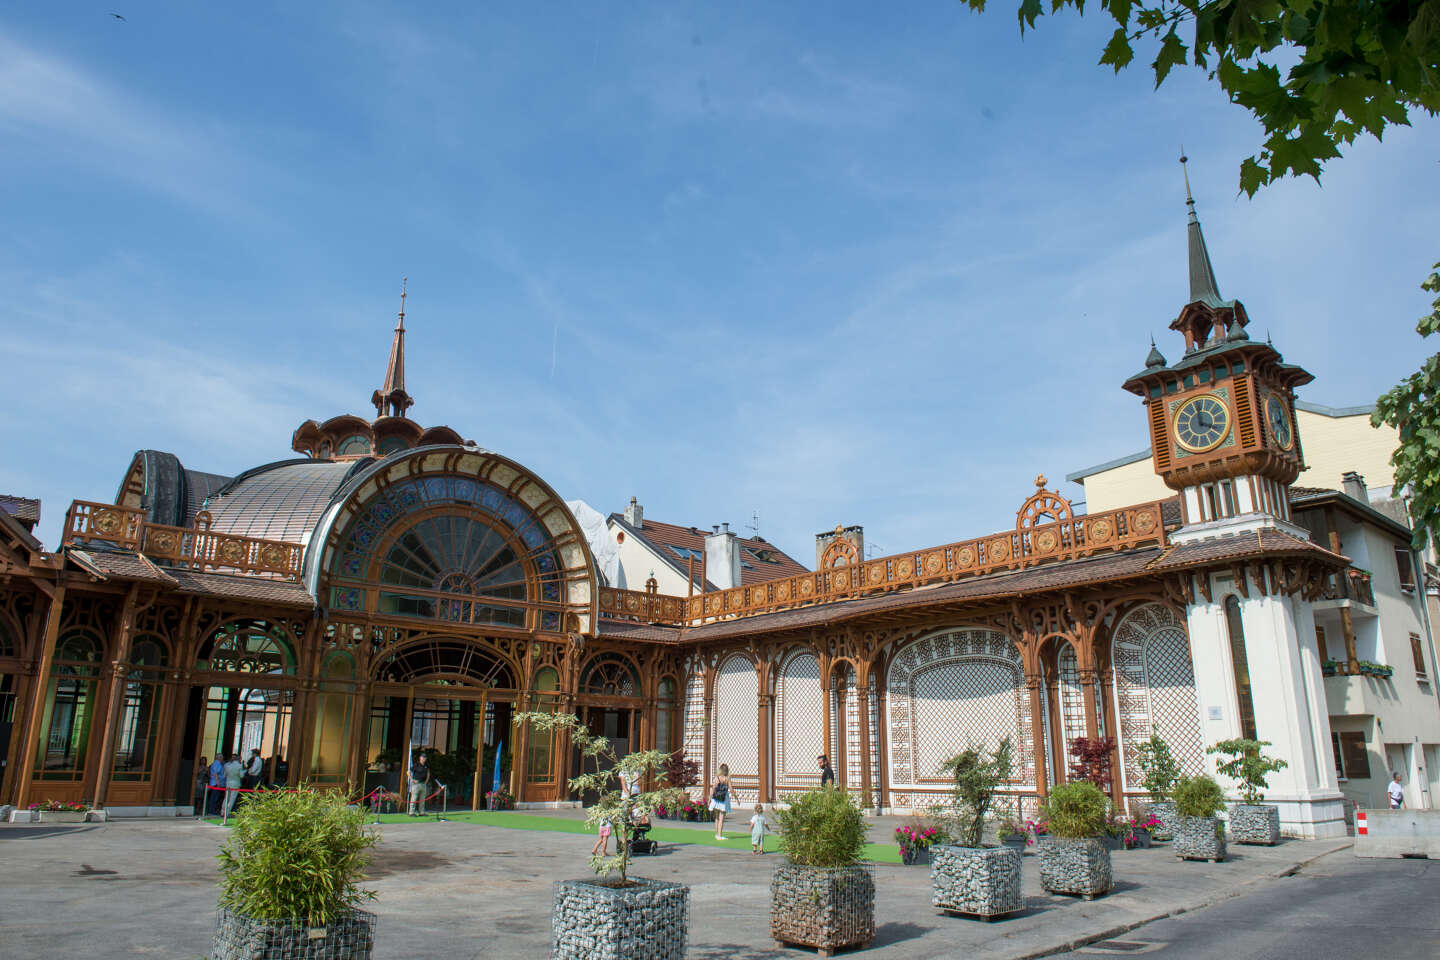 Travel: Evian reconnects with its Belle Epoque past